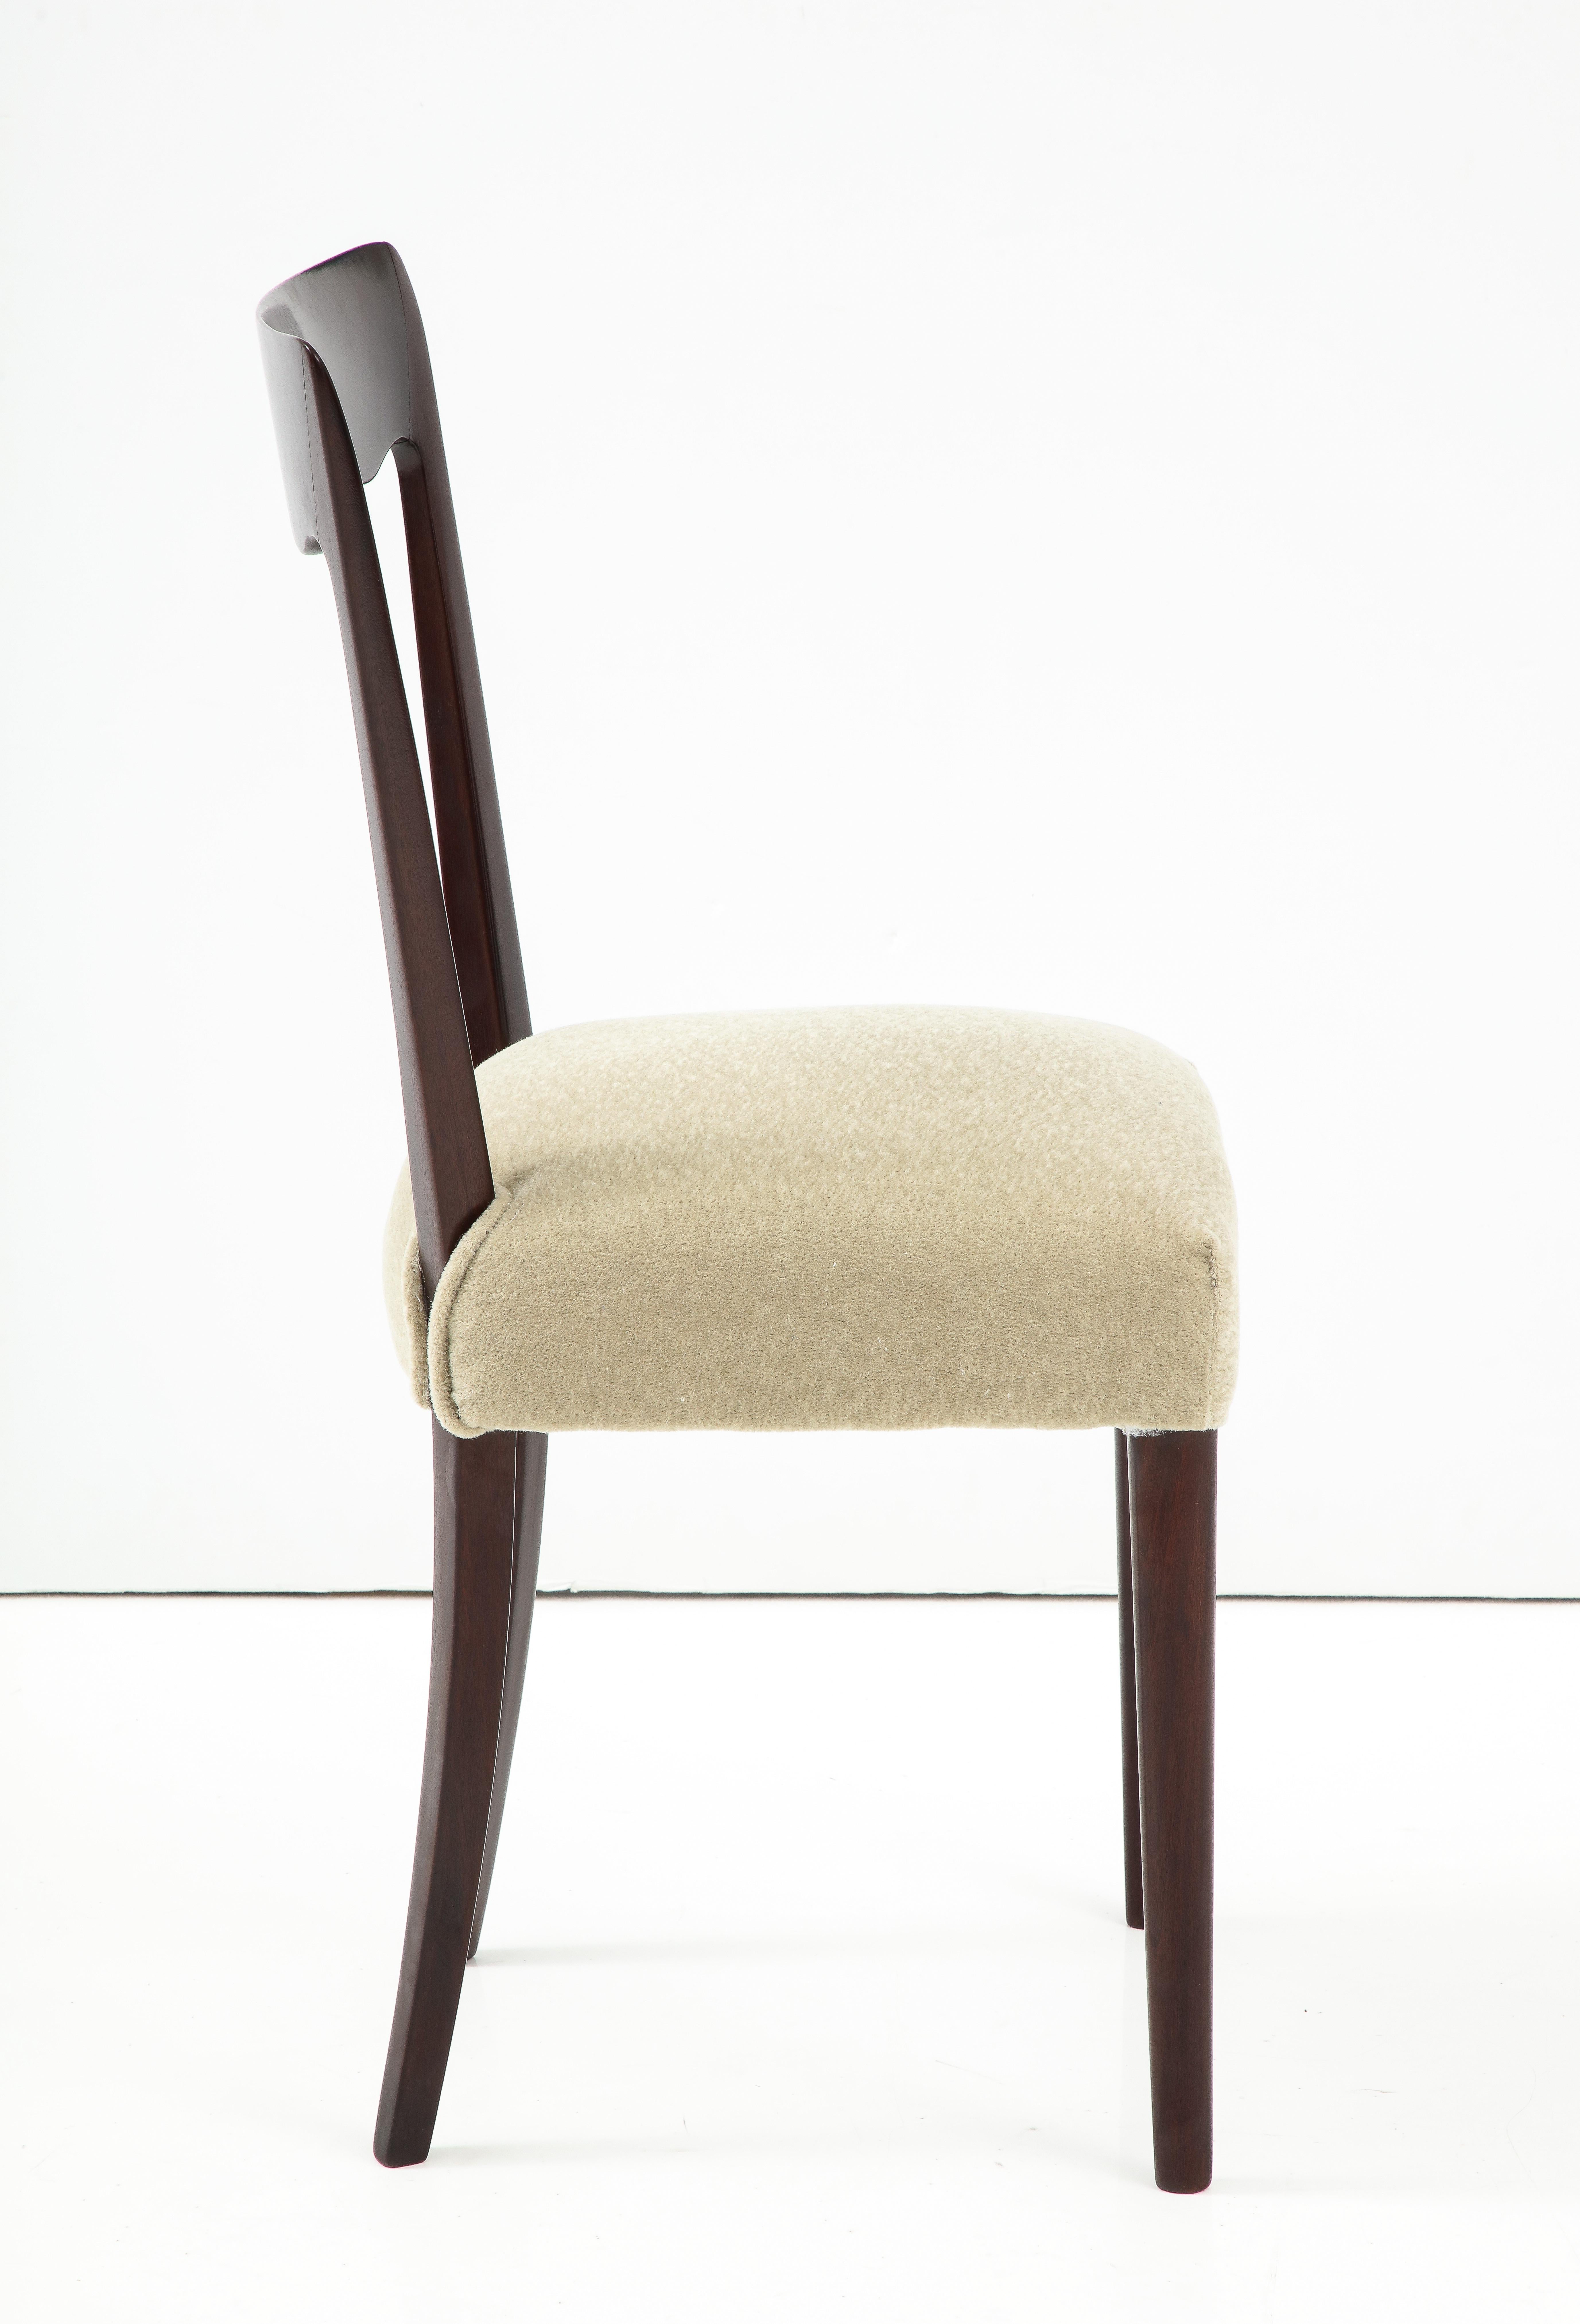 1950's Modernist Italian Dining Chairs In Mohair Upholstery 6